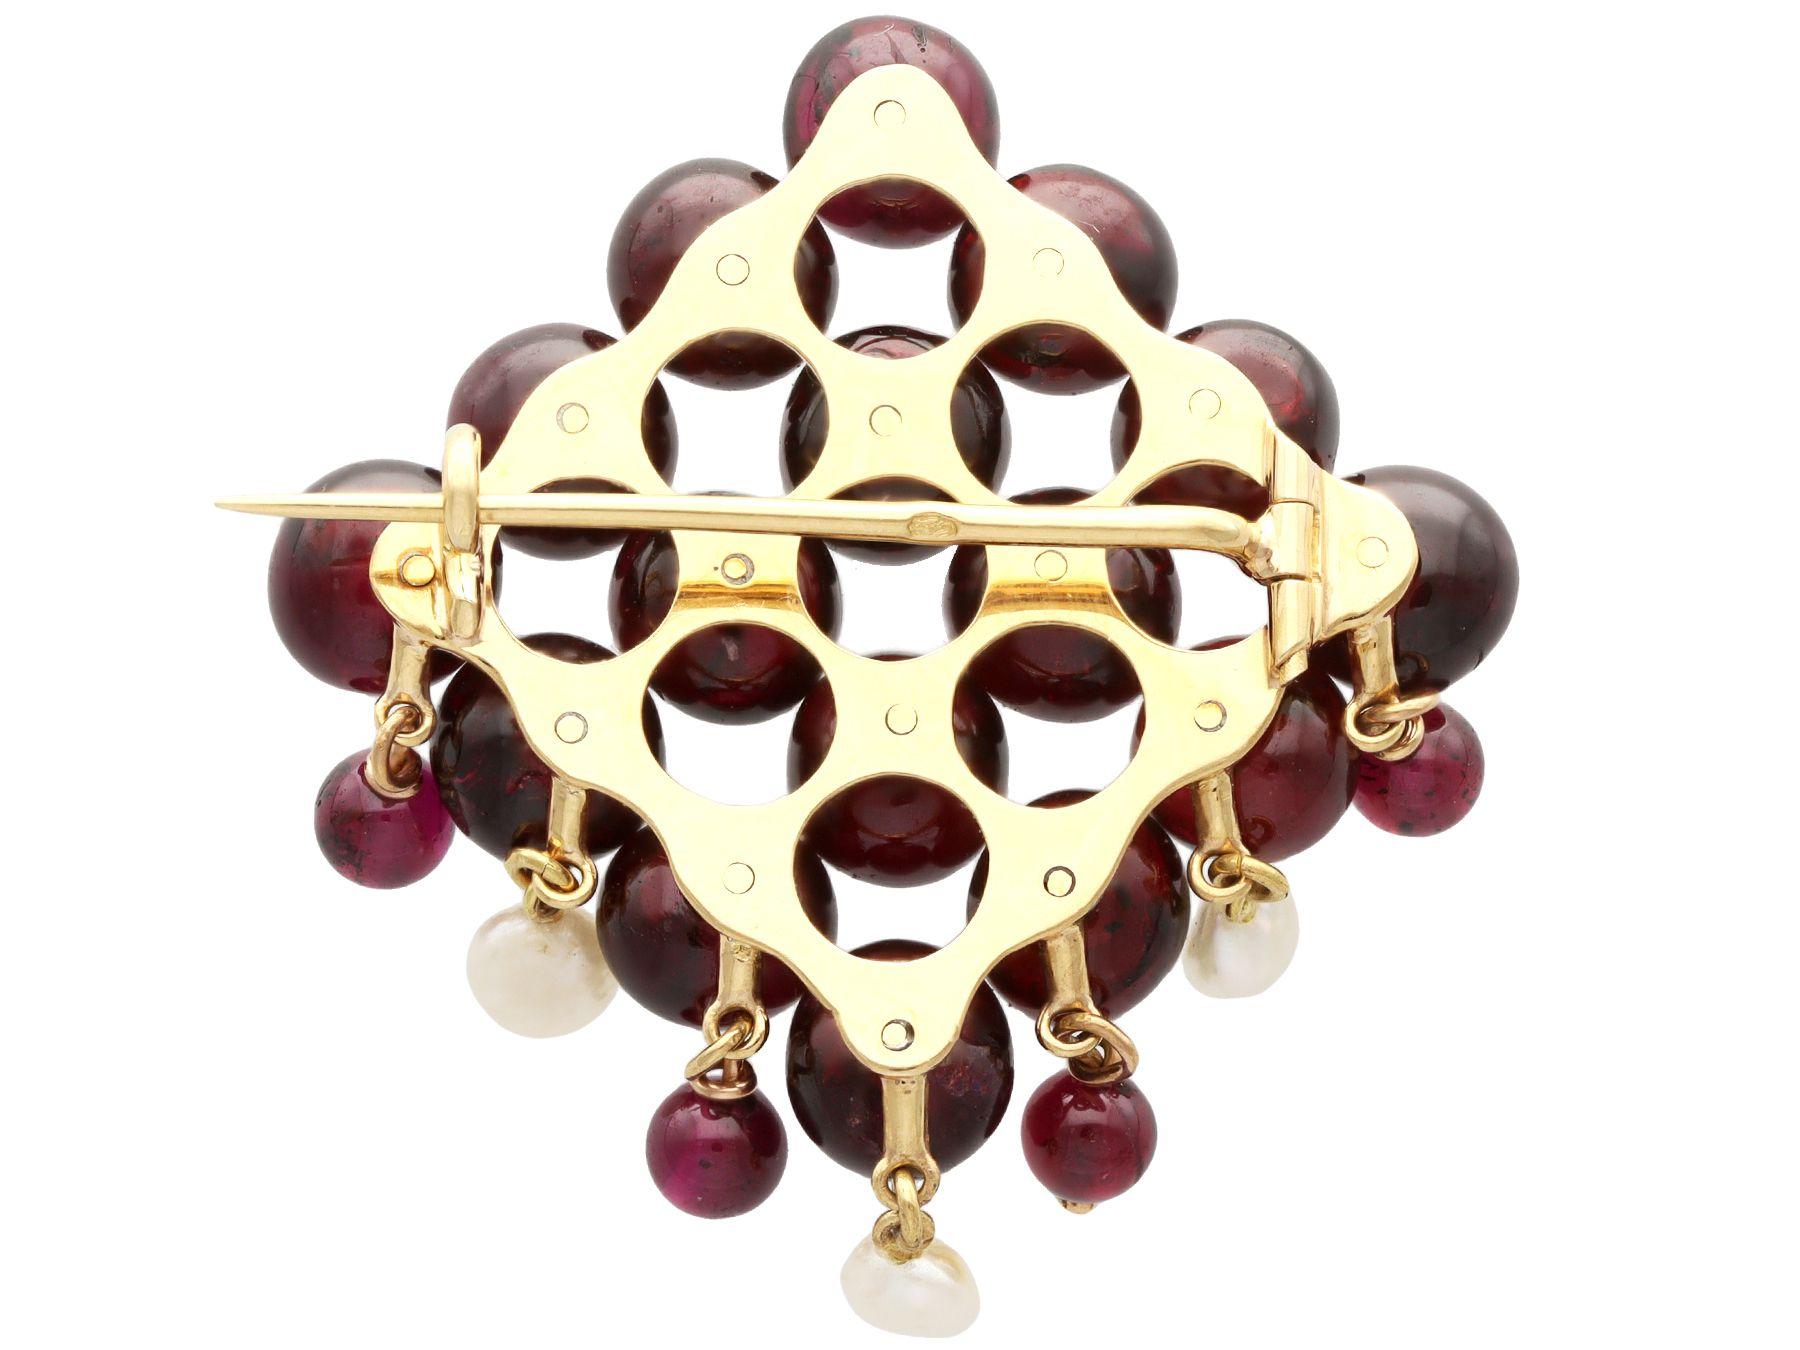 Antique 9.50 Carat Garnet and Pearl Yellow Gold Brooch, circa 1910 In Excellent Condition For Sale In Jesmond, Newcastle Upon Tyne